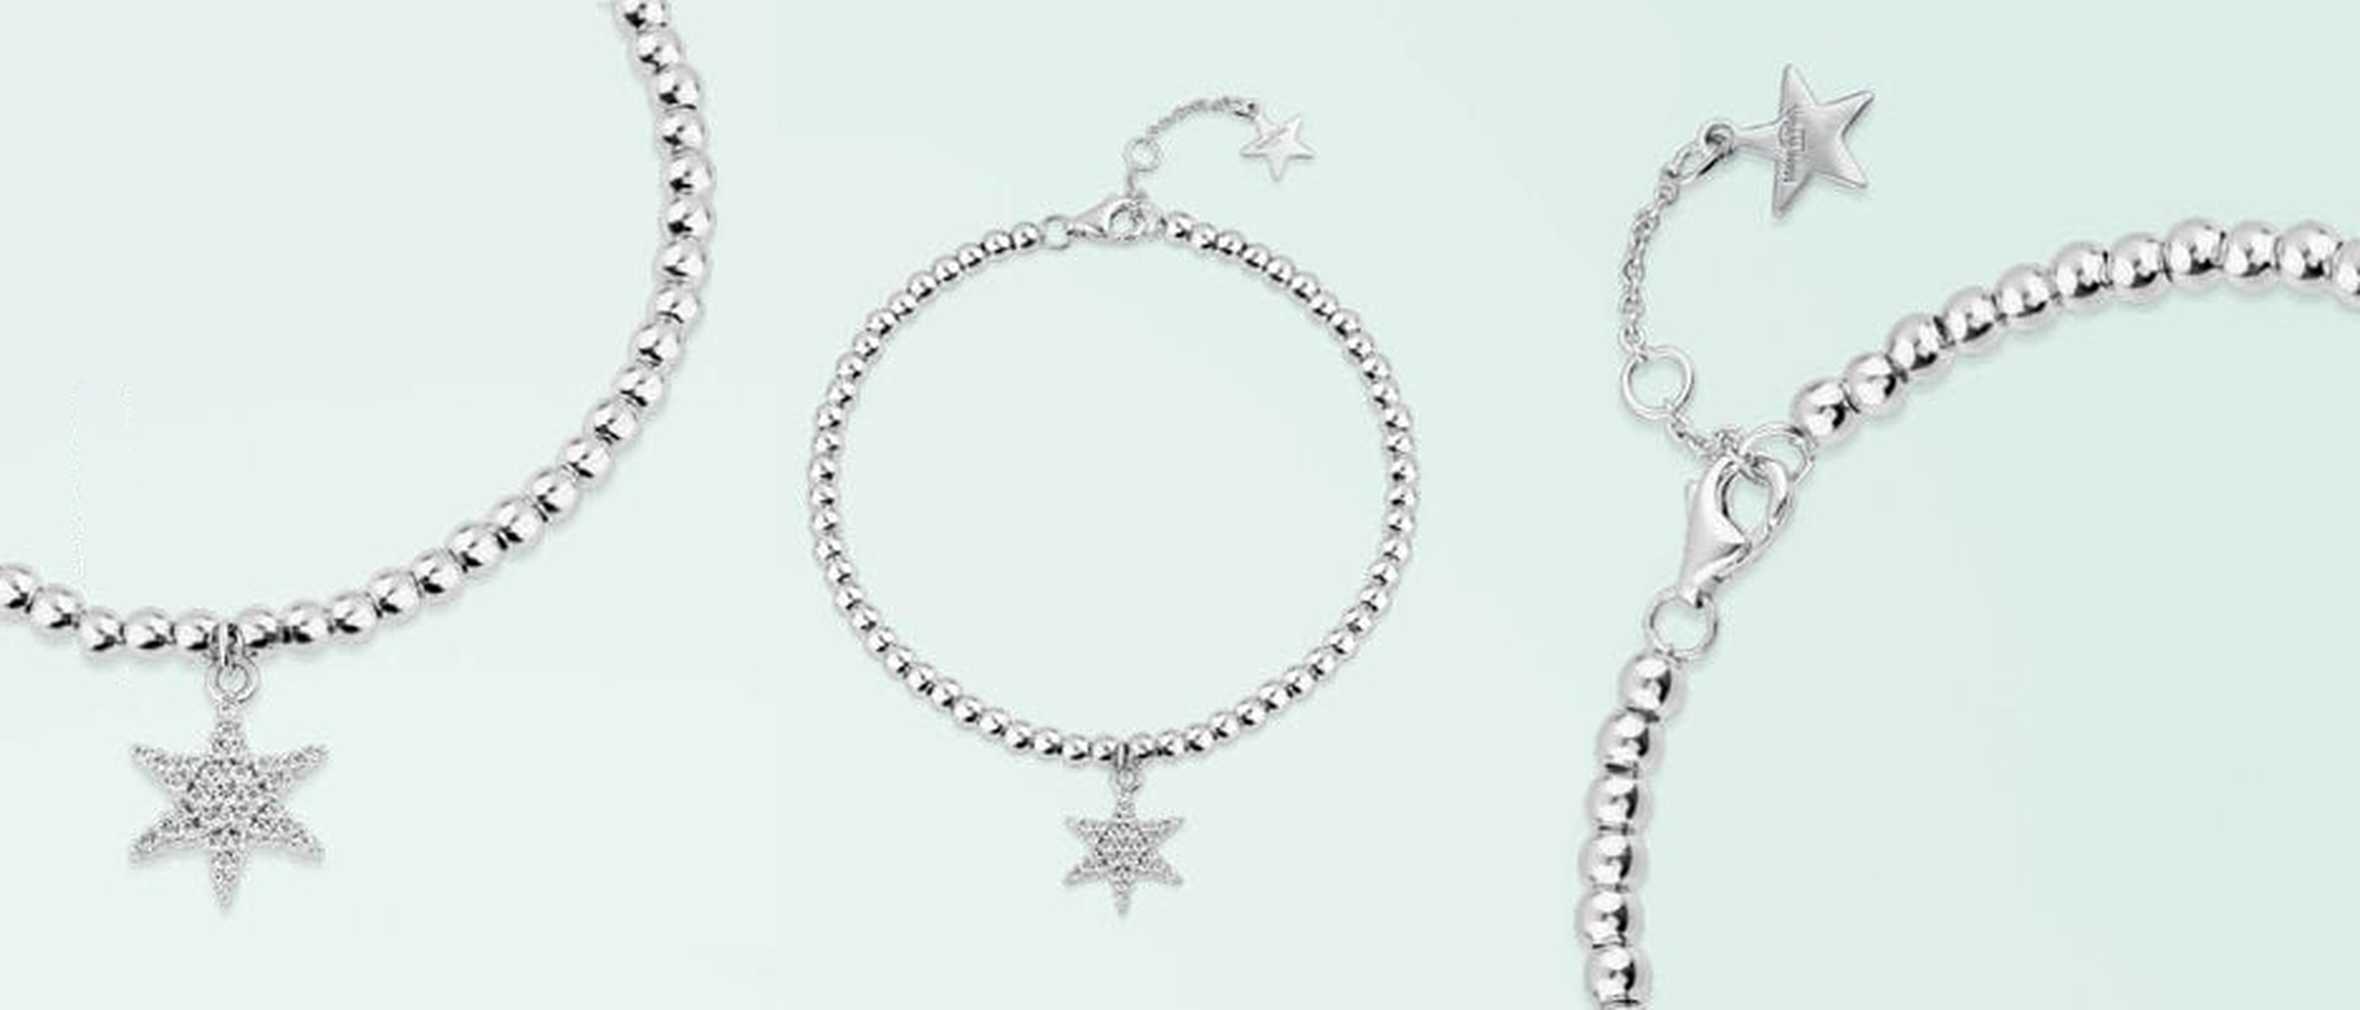 An image showing several views of the bracelet that Fraser Hart are selling in support of Make-A-Wish UK.